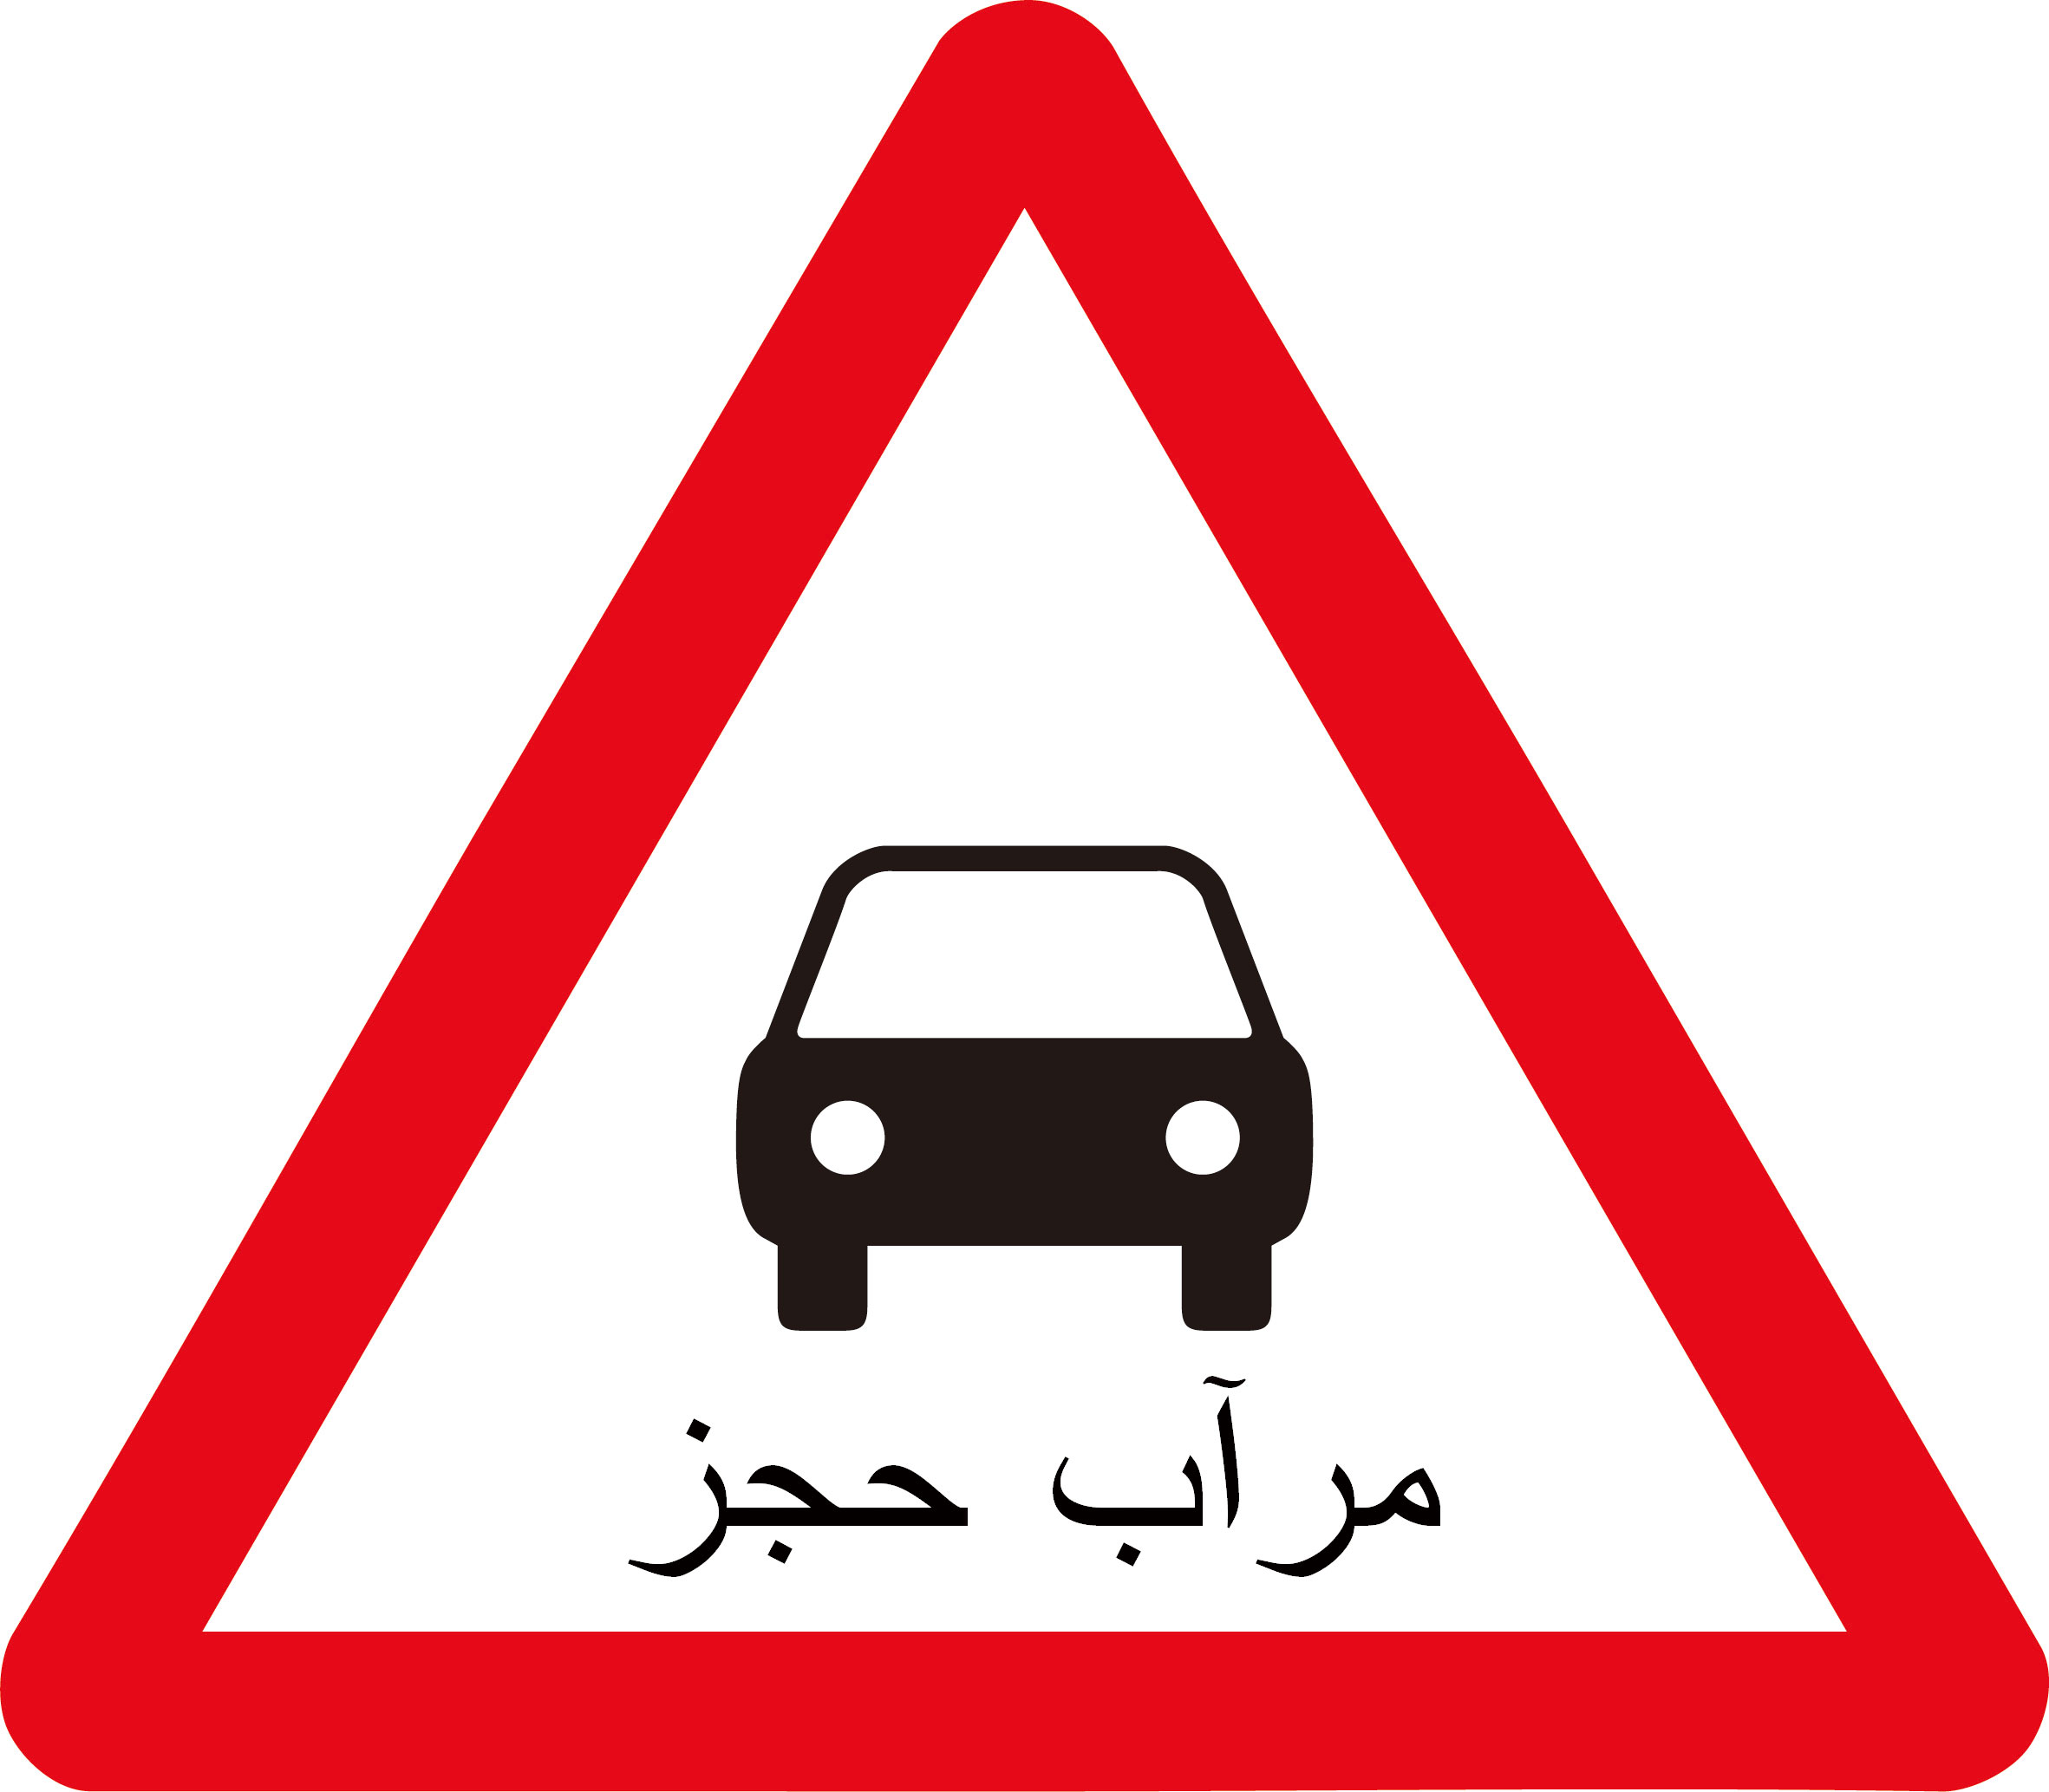 Warning triangle road traffic signs and symbols printing service ...